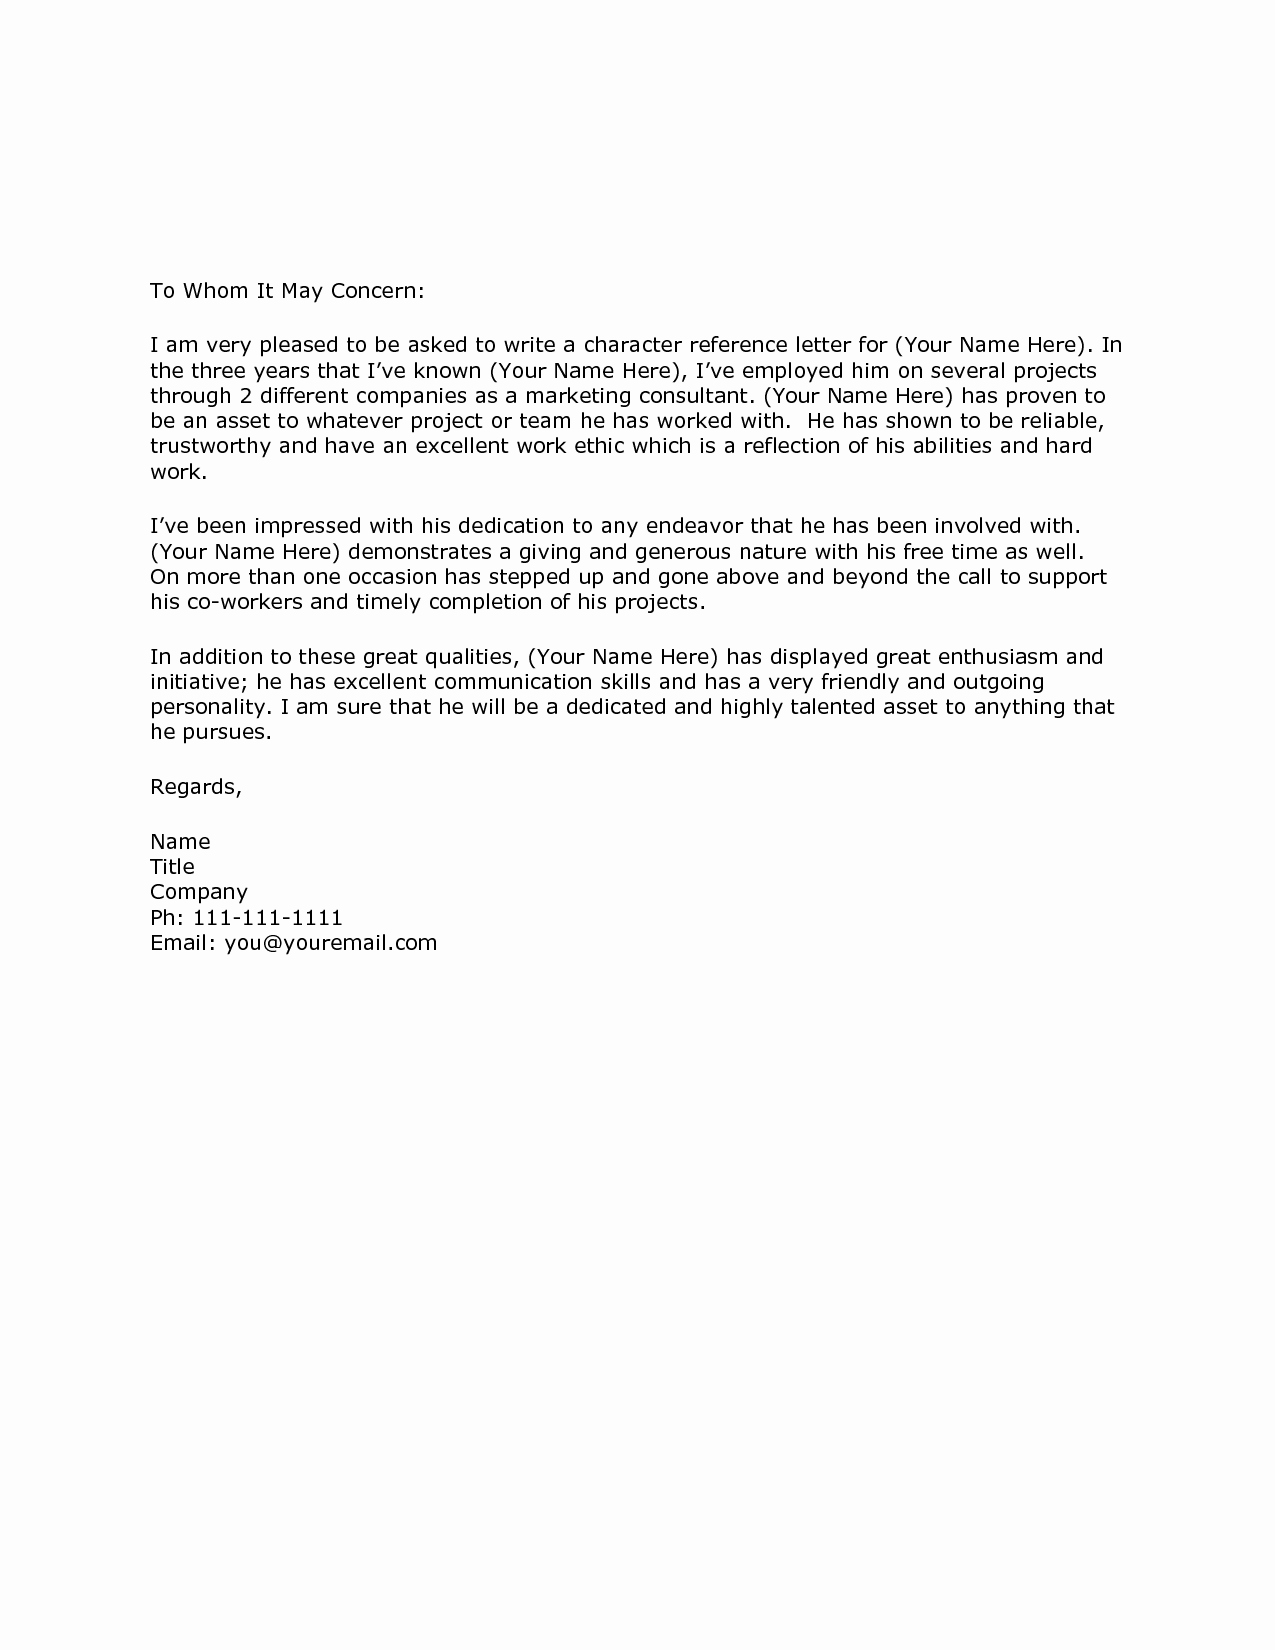 Personal Reference Letter Template Free Awesome Letter Personal Reference Letter